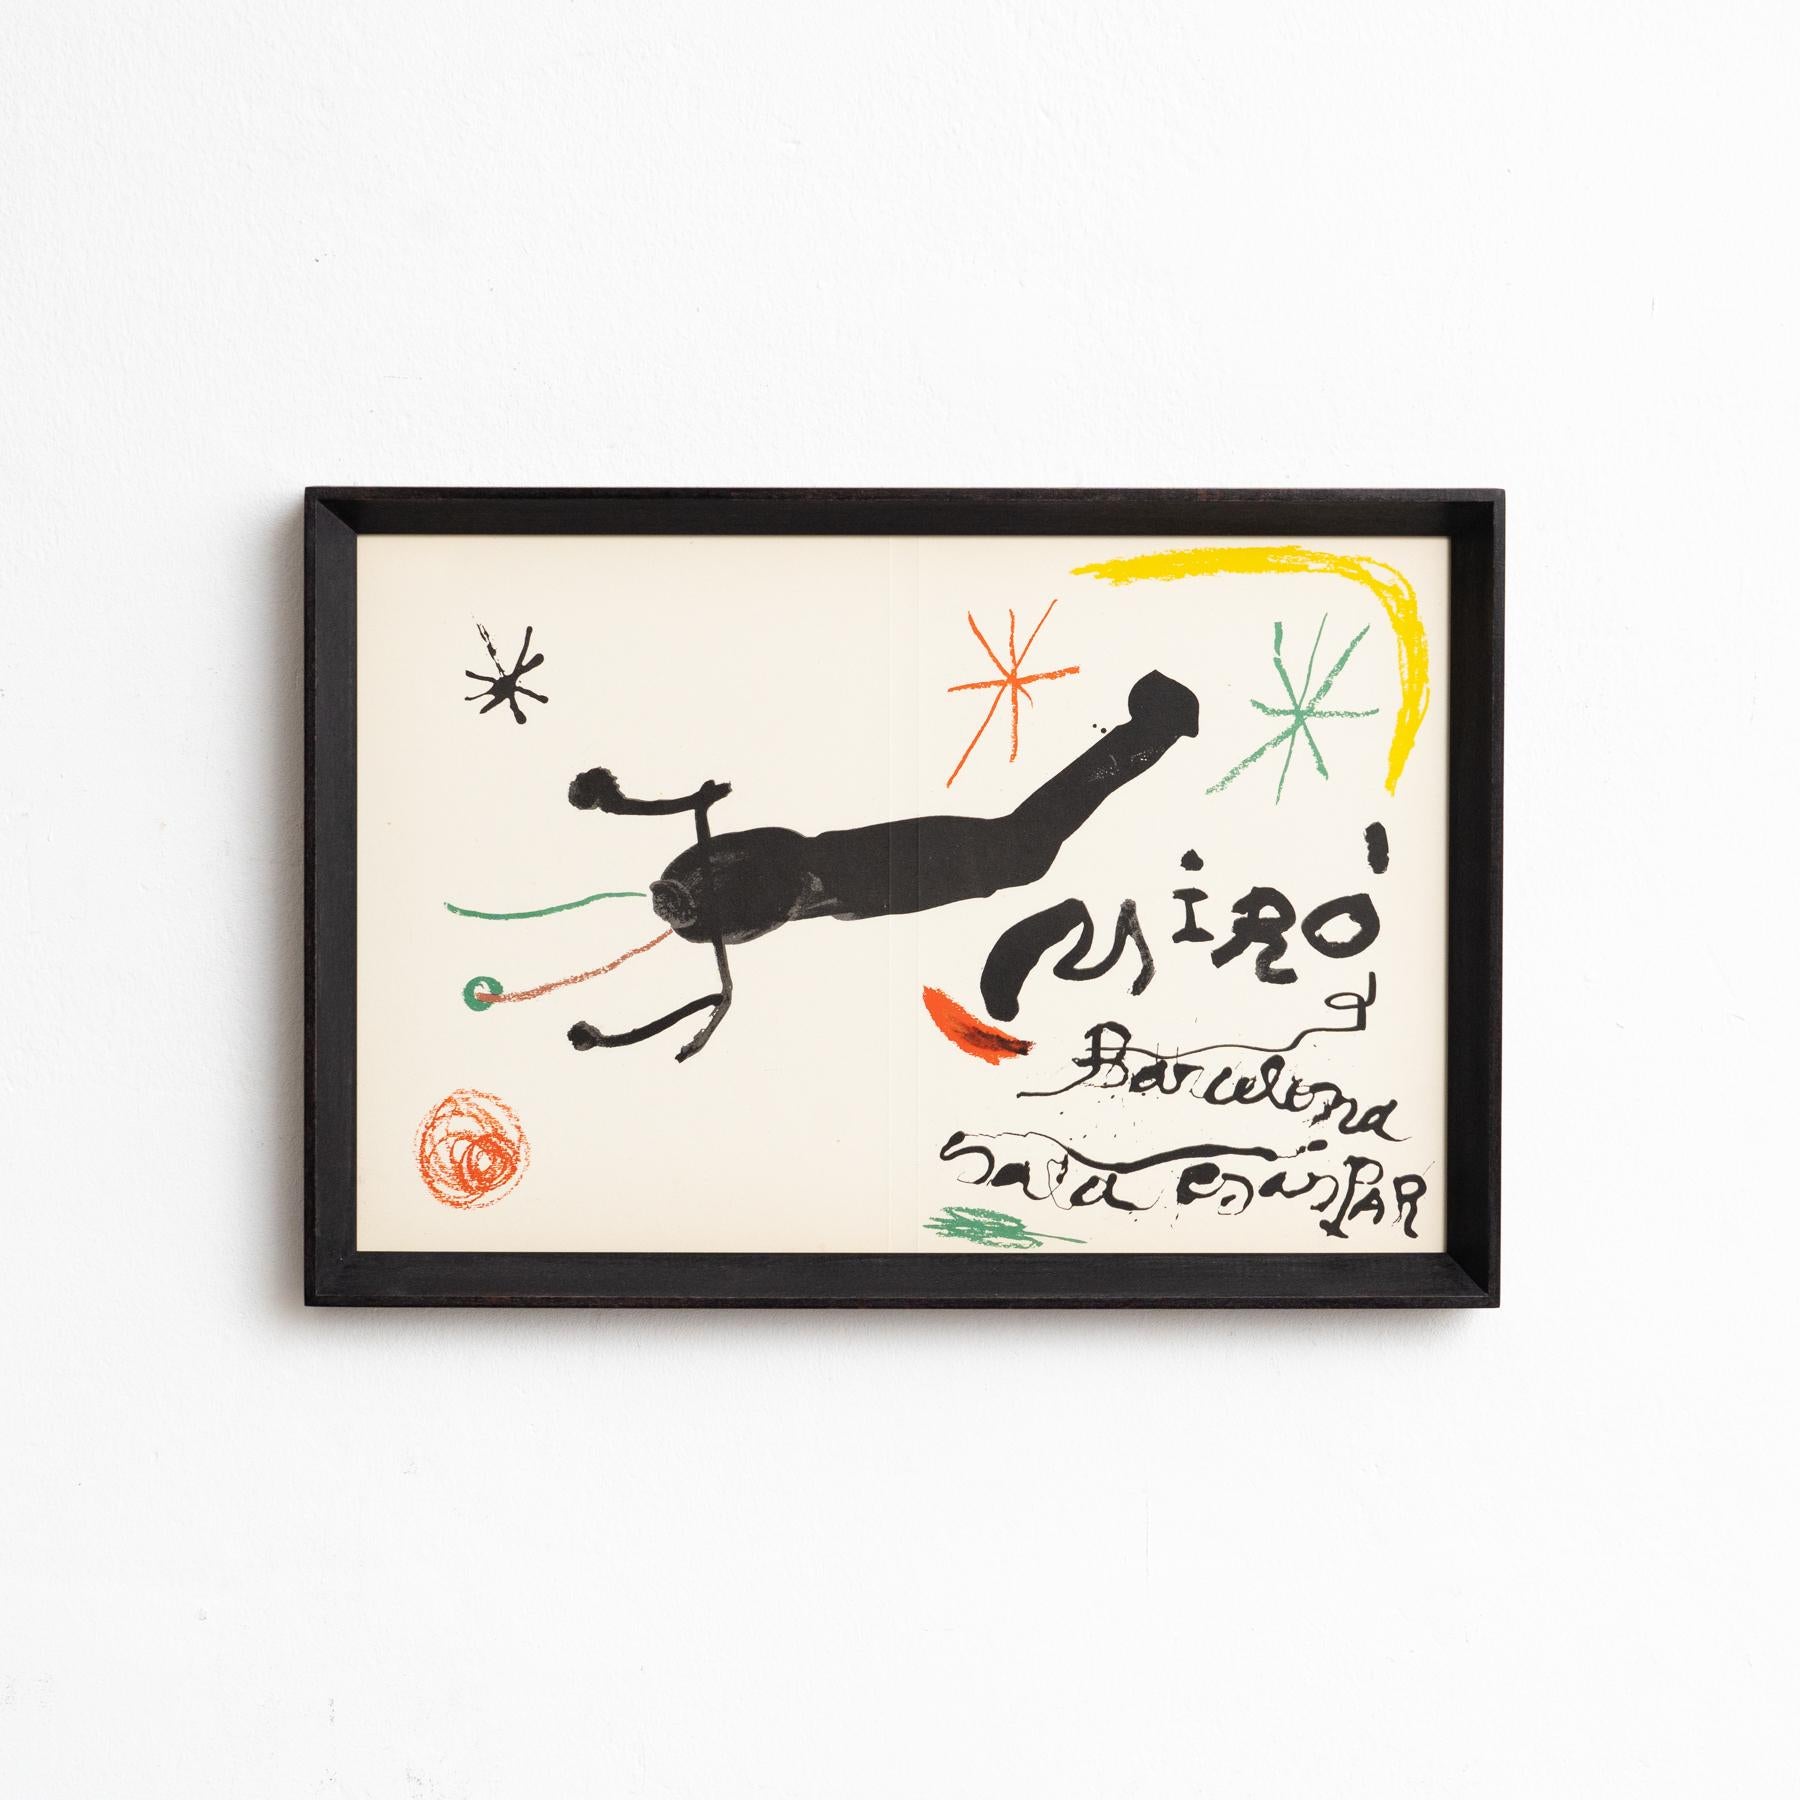 Discover the captivating world of Joan Miró's artistry through an exceptional piece: a color lithography from 1964, prominently featured as the cover of 